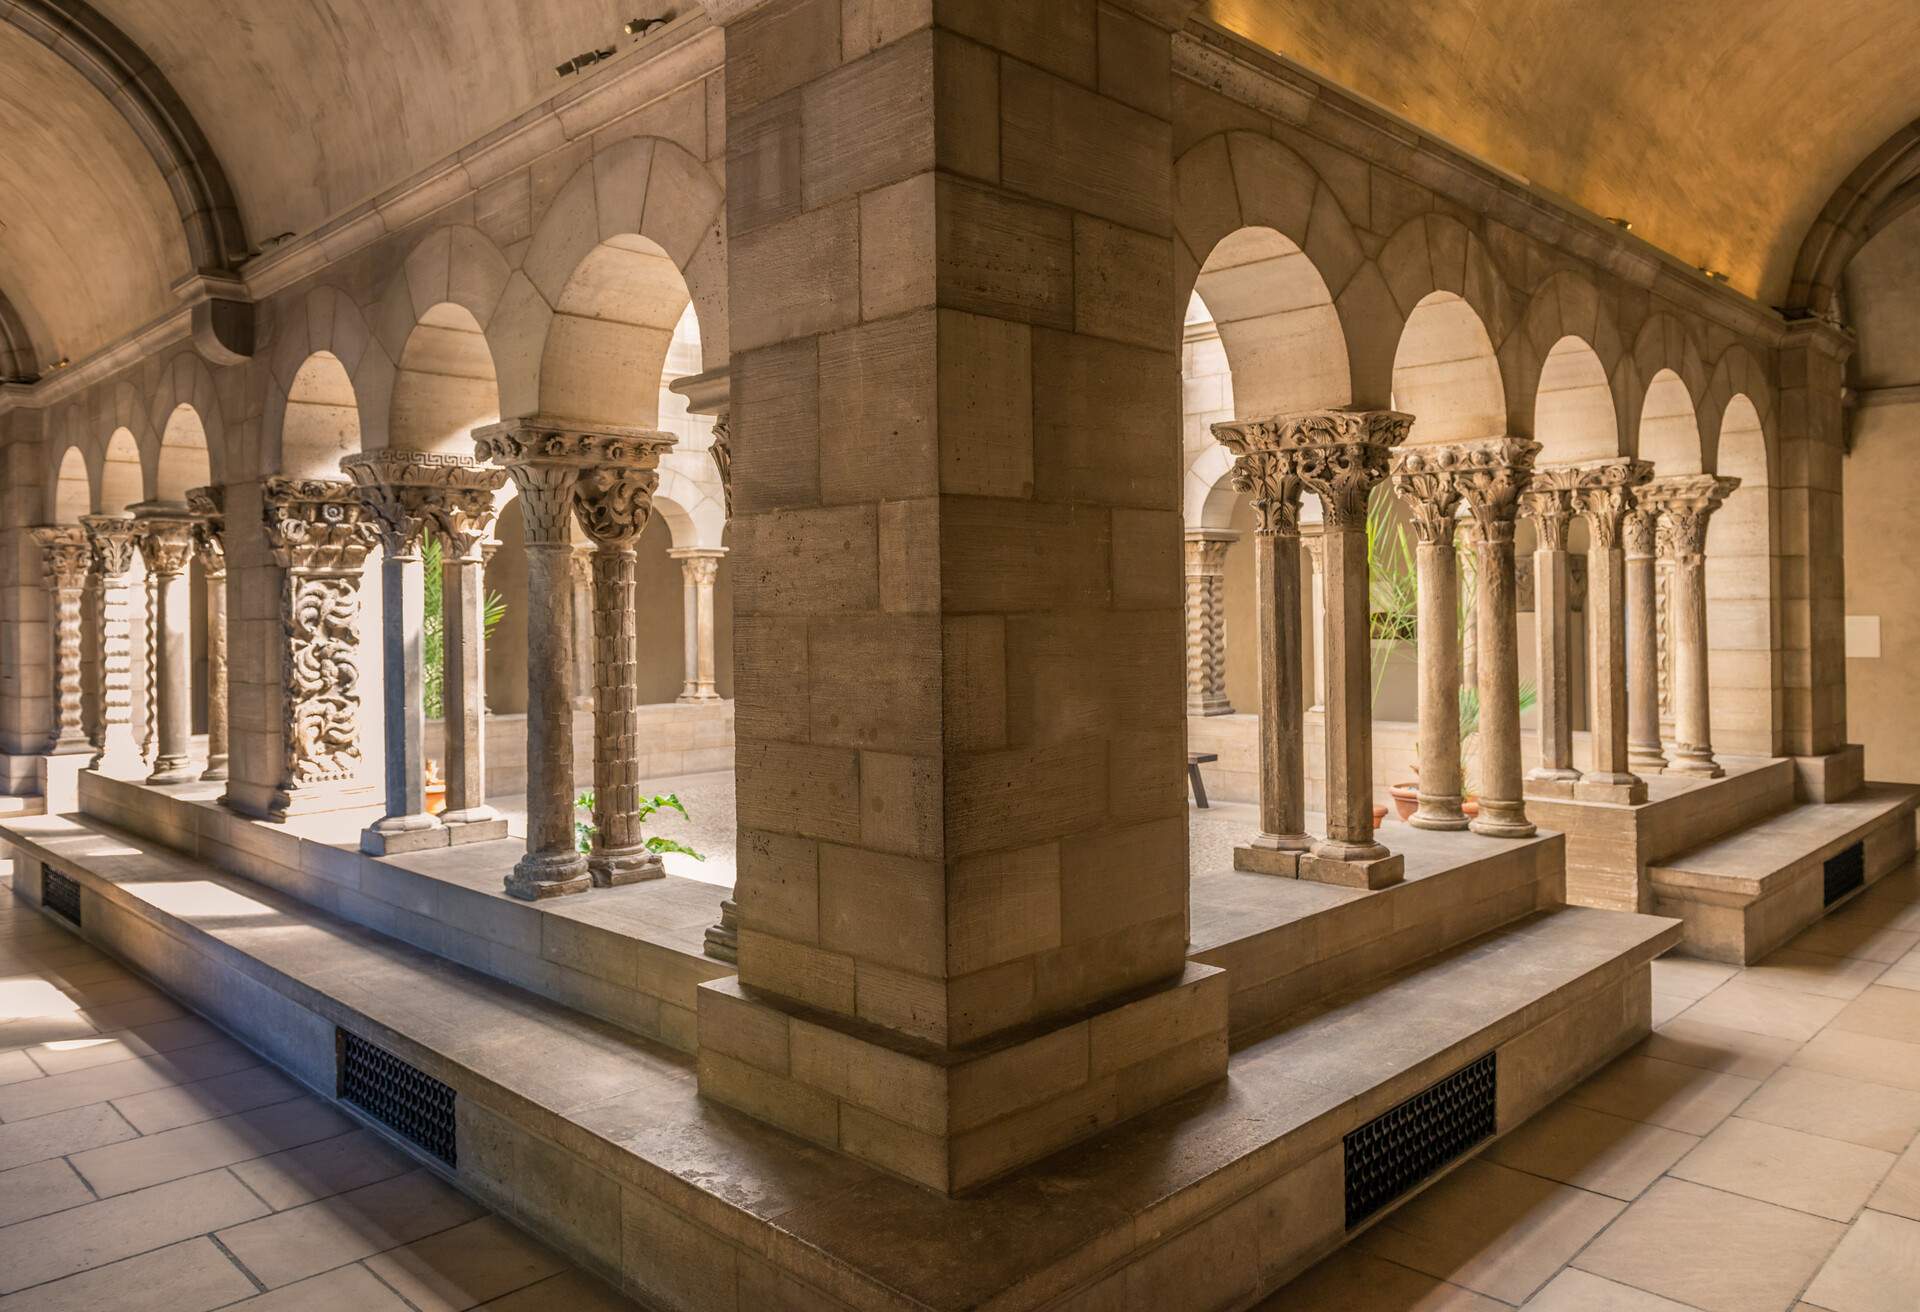 The cloister arch perspective in The Cloisters offers a captivating view, drawing the eye along a series of arched passageways that converge in the distance.